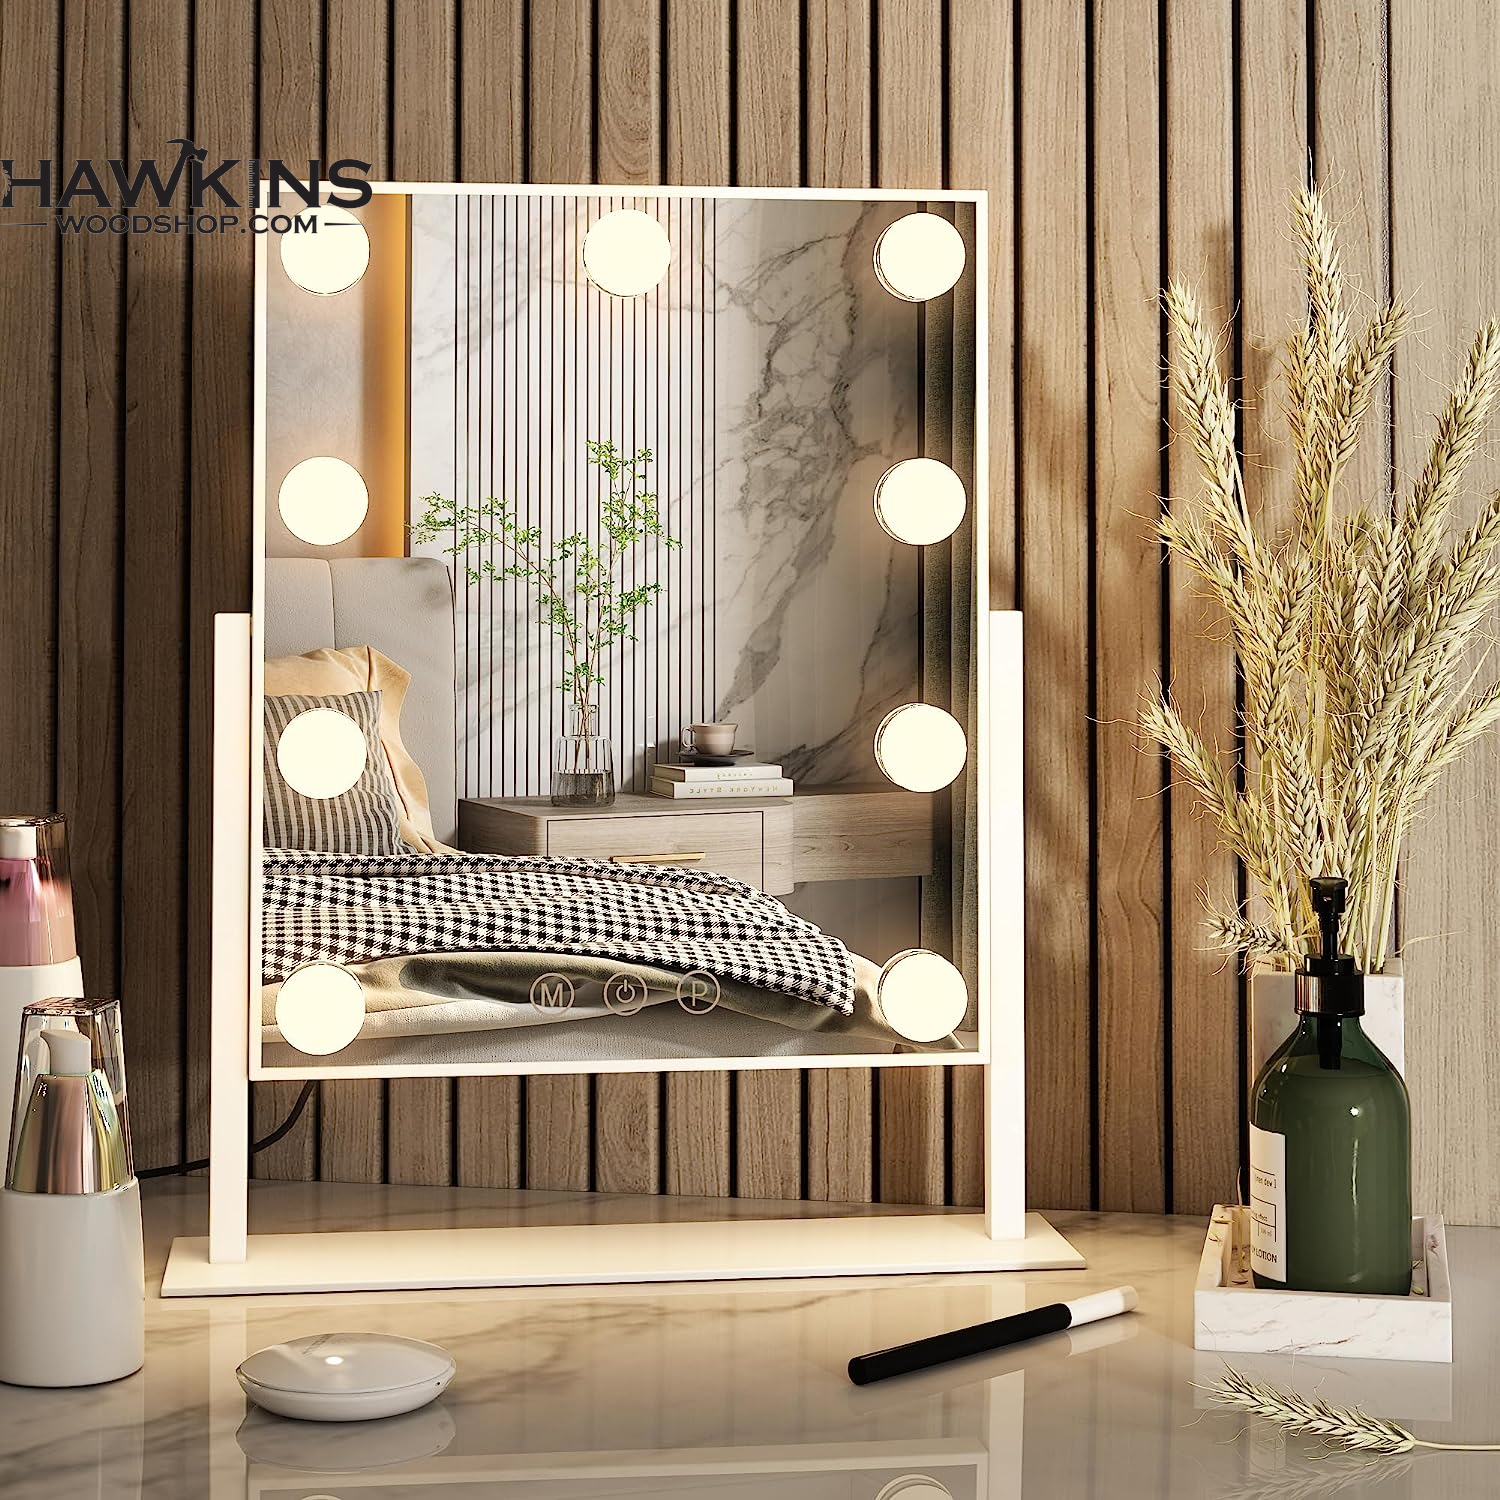 Vanity Mirror With Lights,makeup Mirror With Lights,3 Color